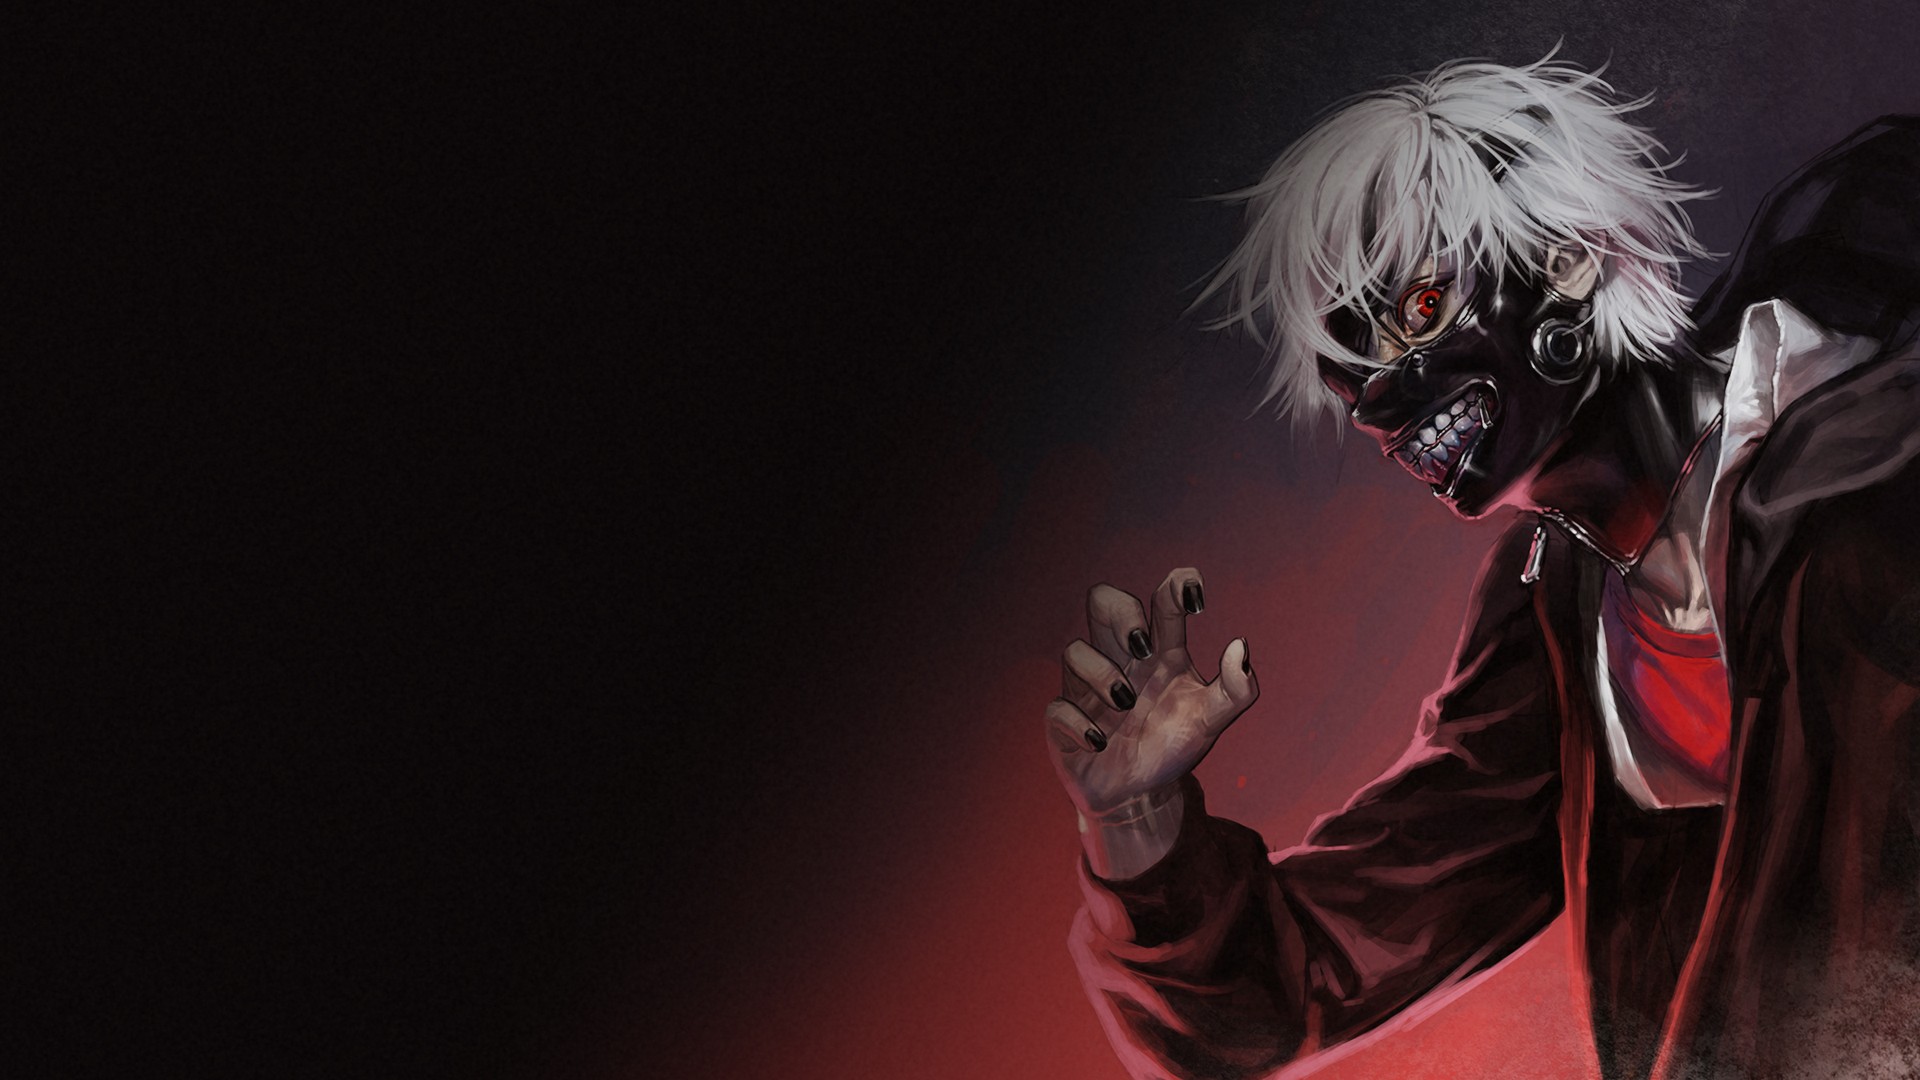 Anime 1920x1080 anime boys Tokyo Ghoul anime red eyes simple background